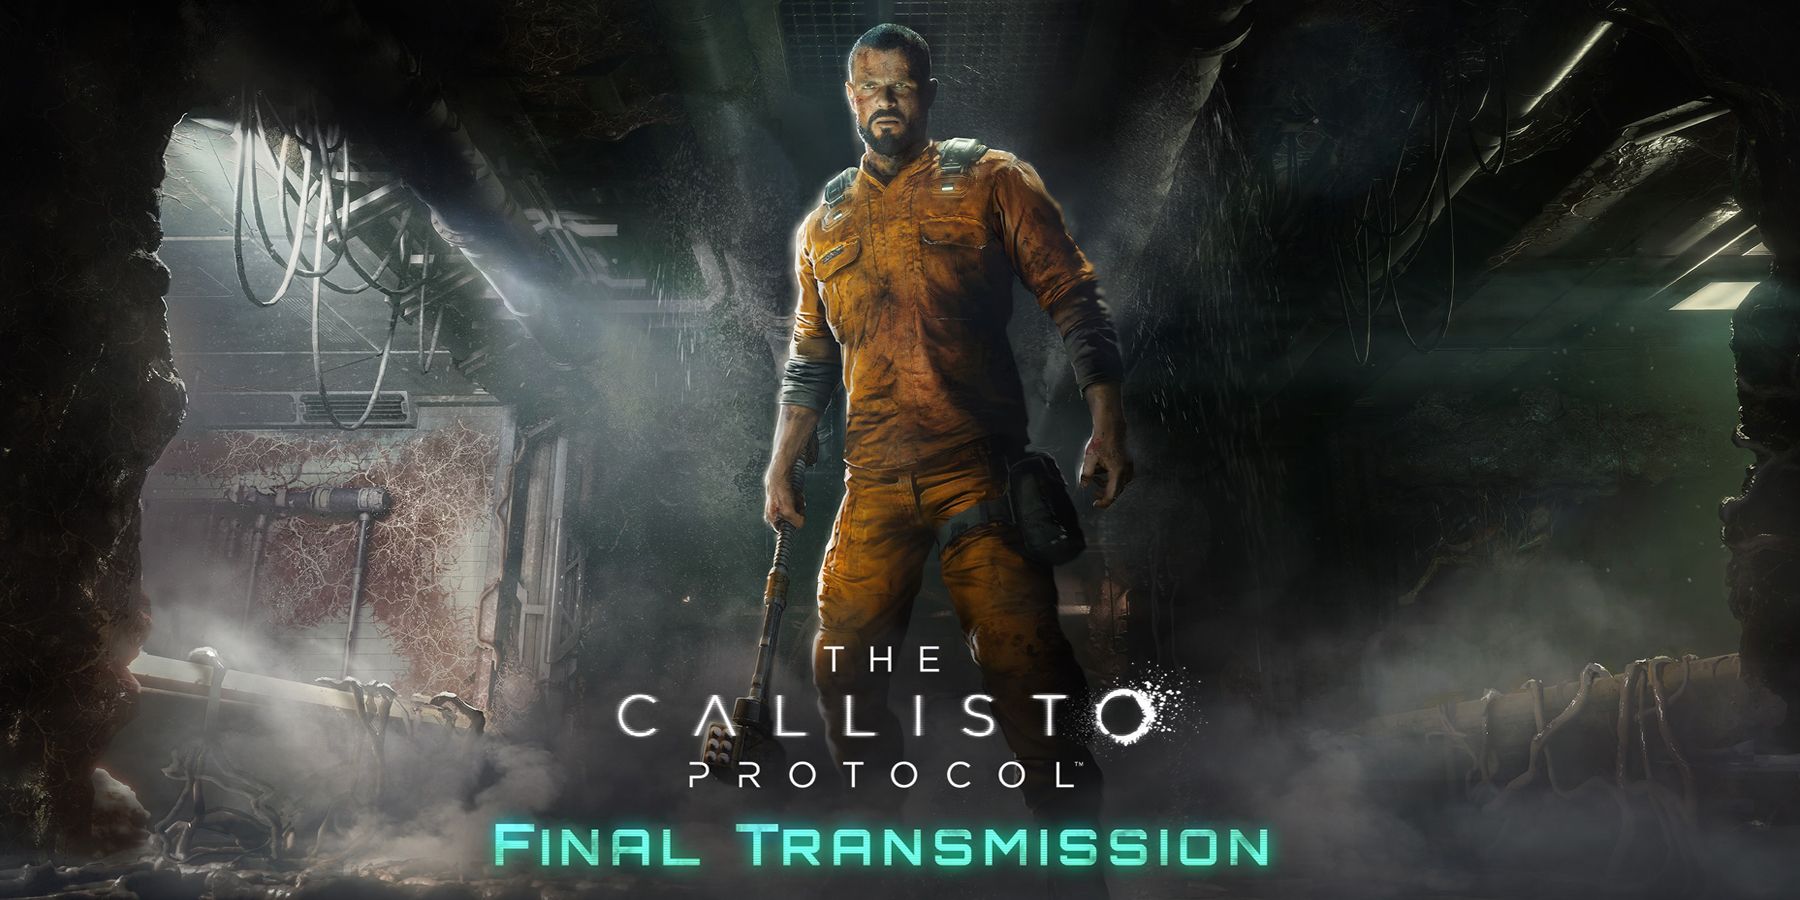 Callisto Protocol chapters, Full list of missions, how many to expect